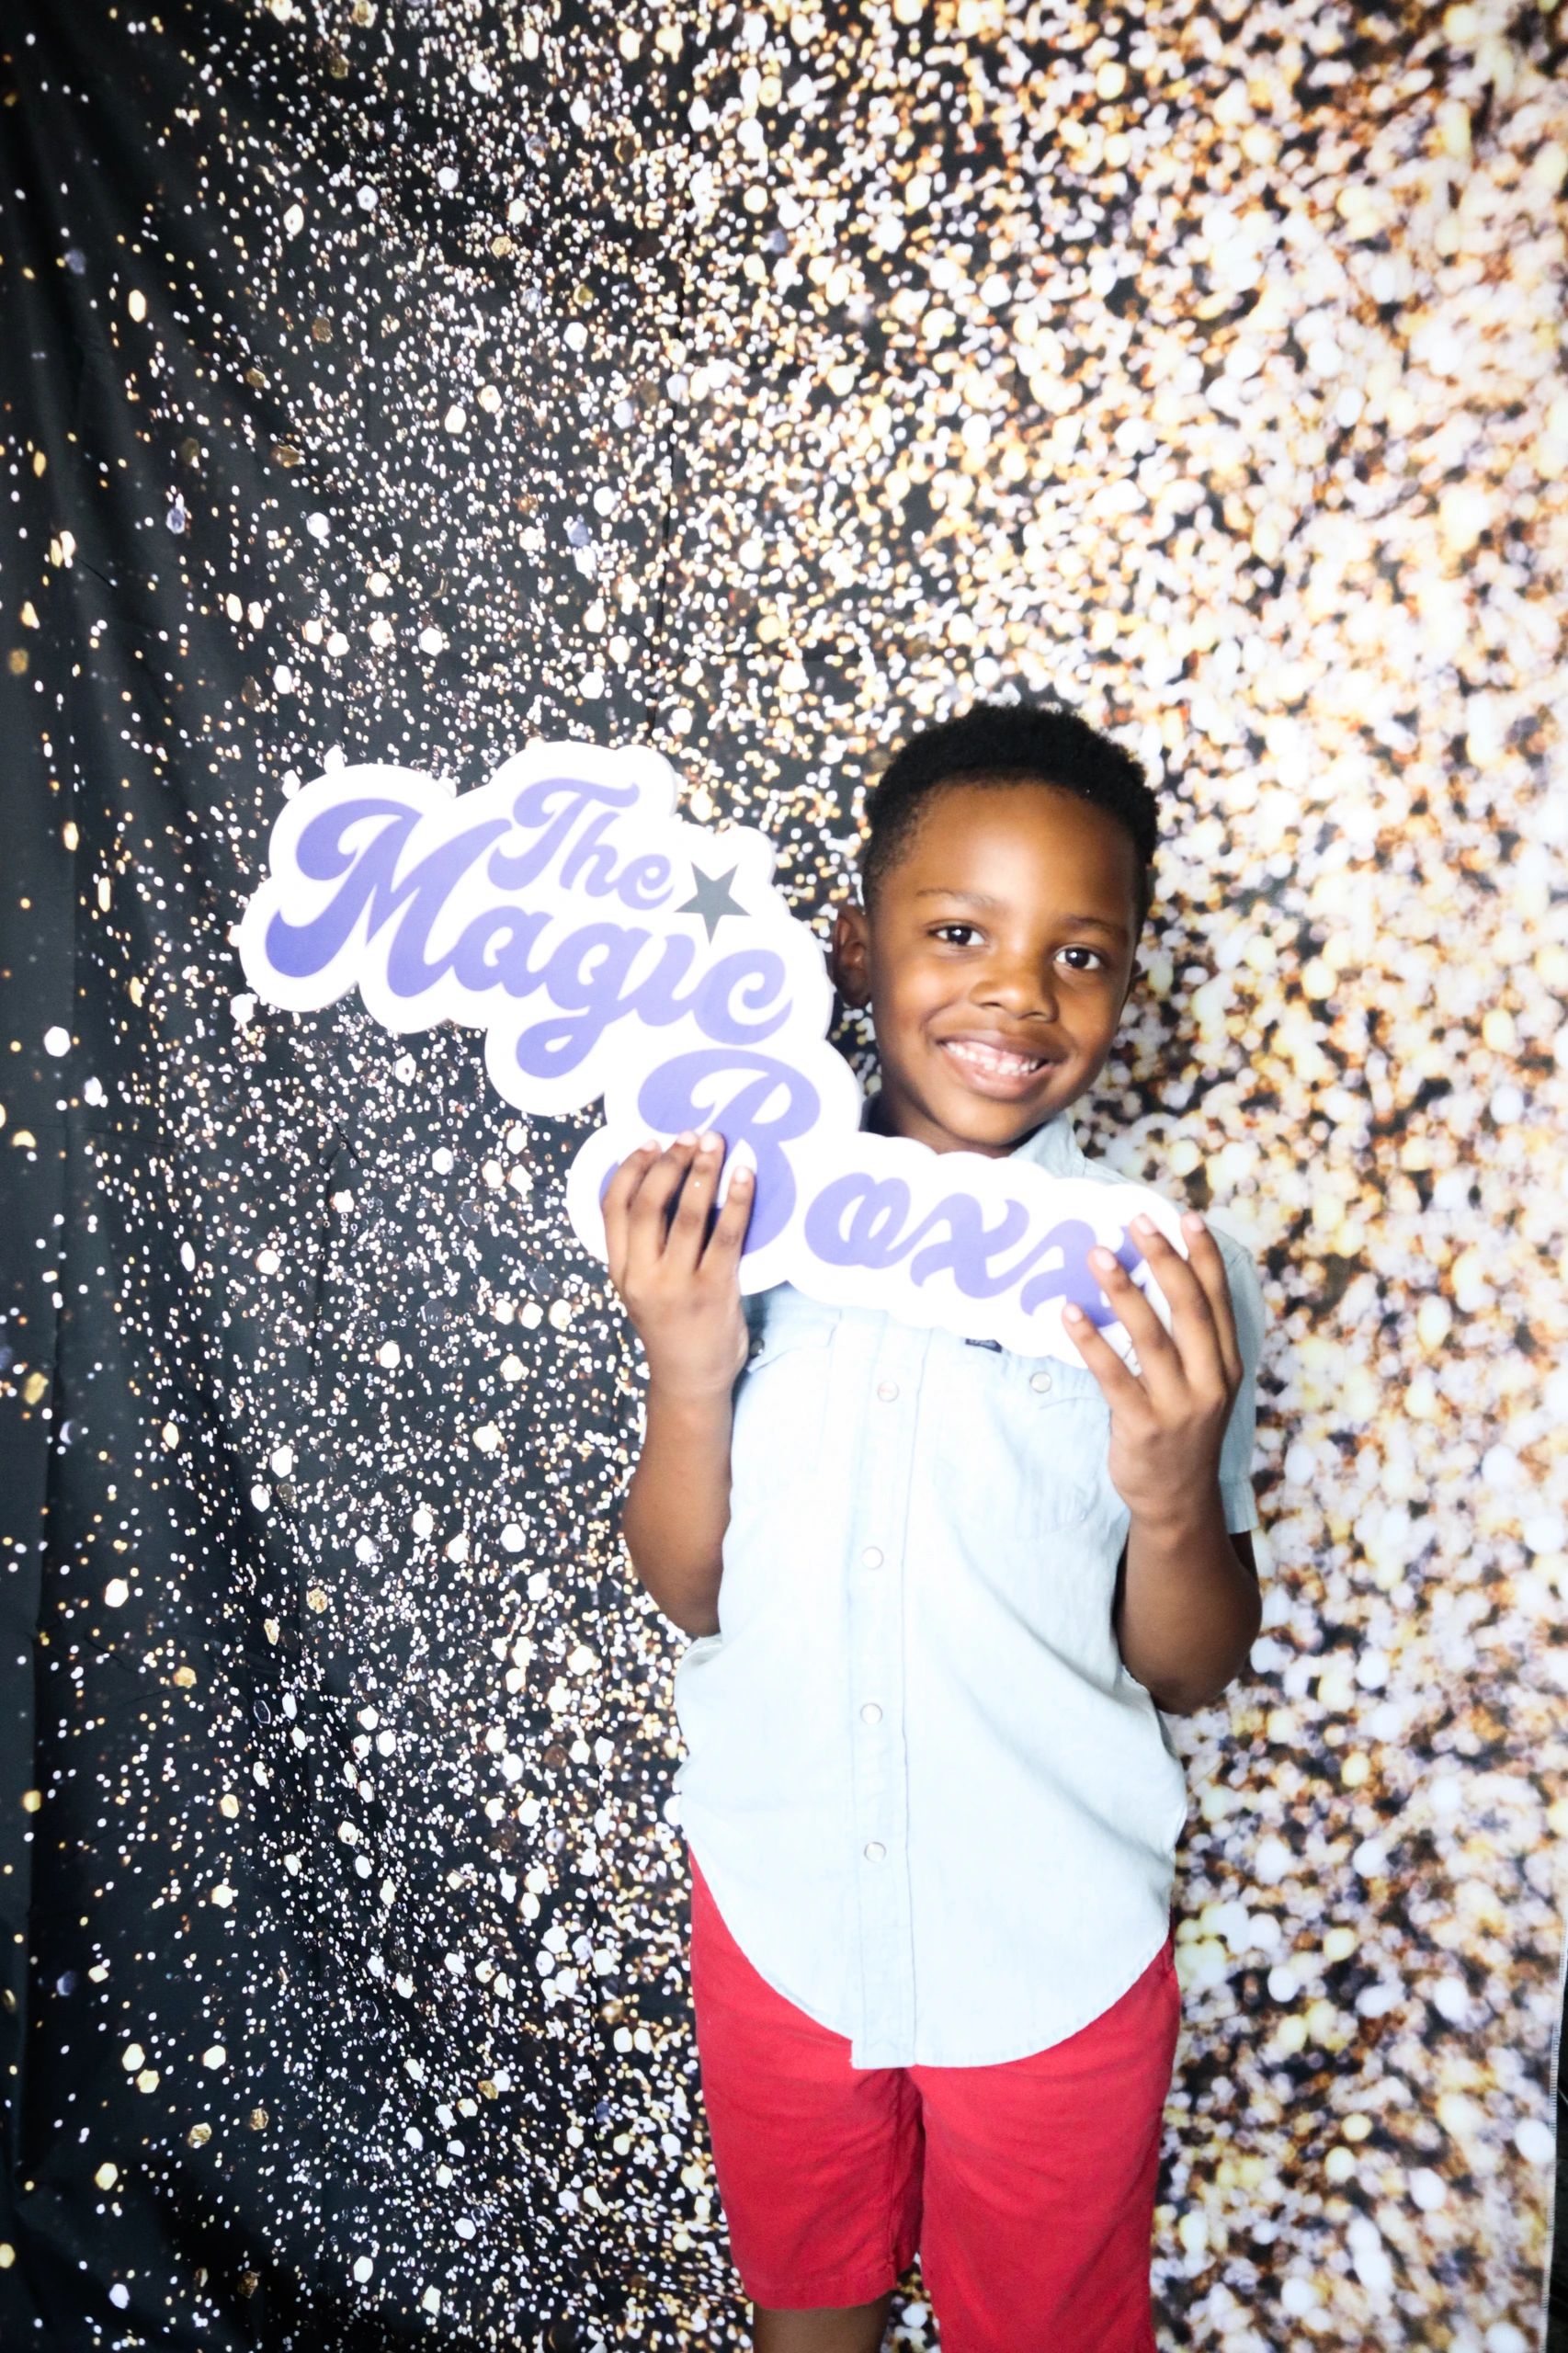 The Magic Boxx Photo Booth Company can provide custom photo booths for any event.